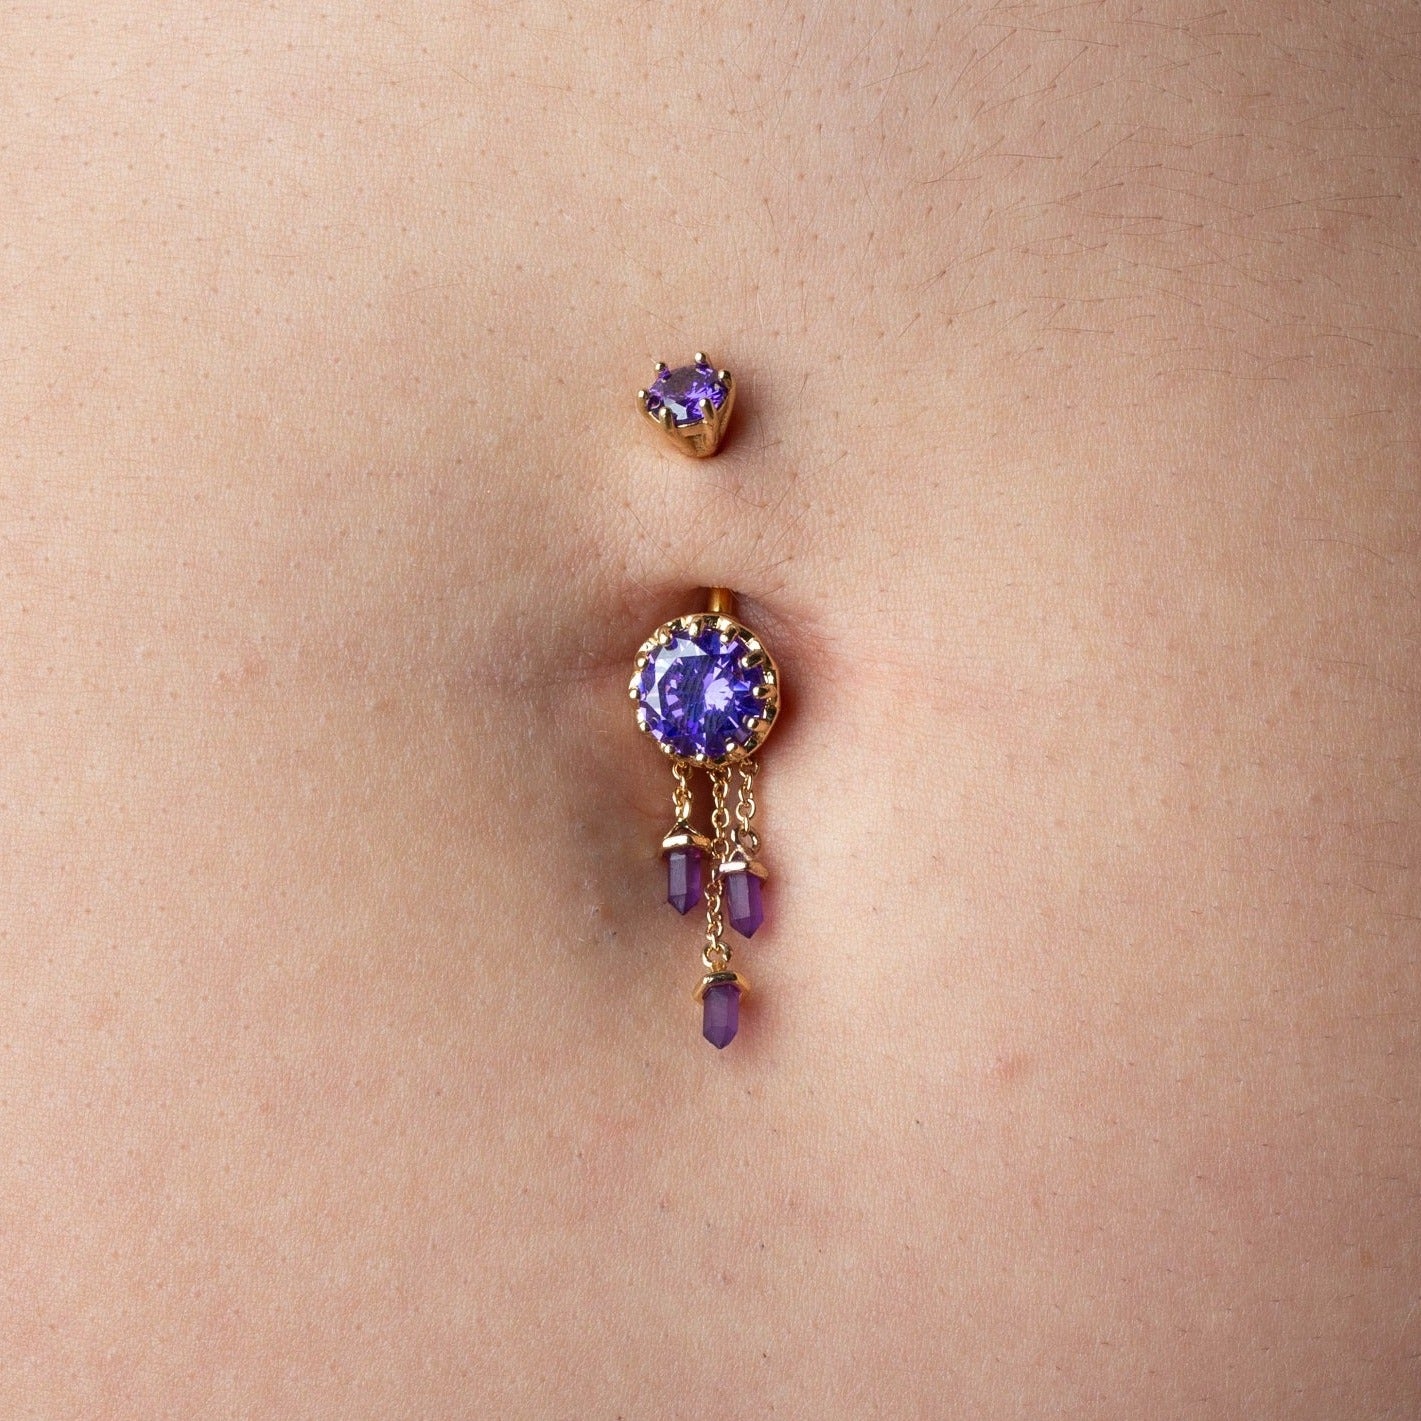 Amethyst Gem with Triple Dangling Charms Belly Button Ring - 316L Stainless Steel